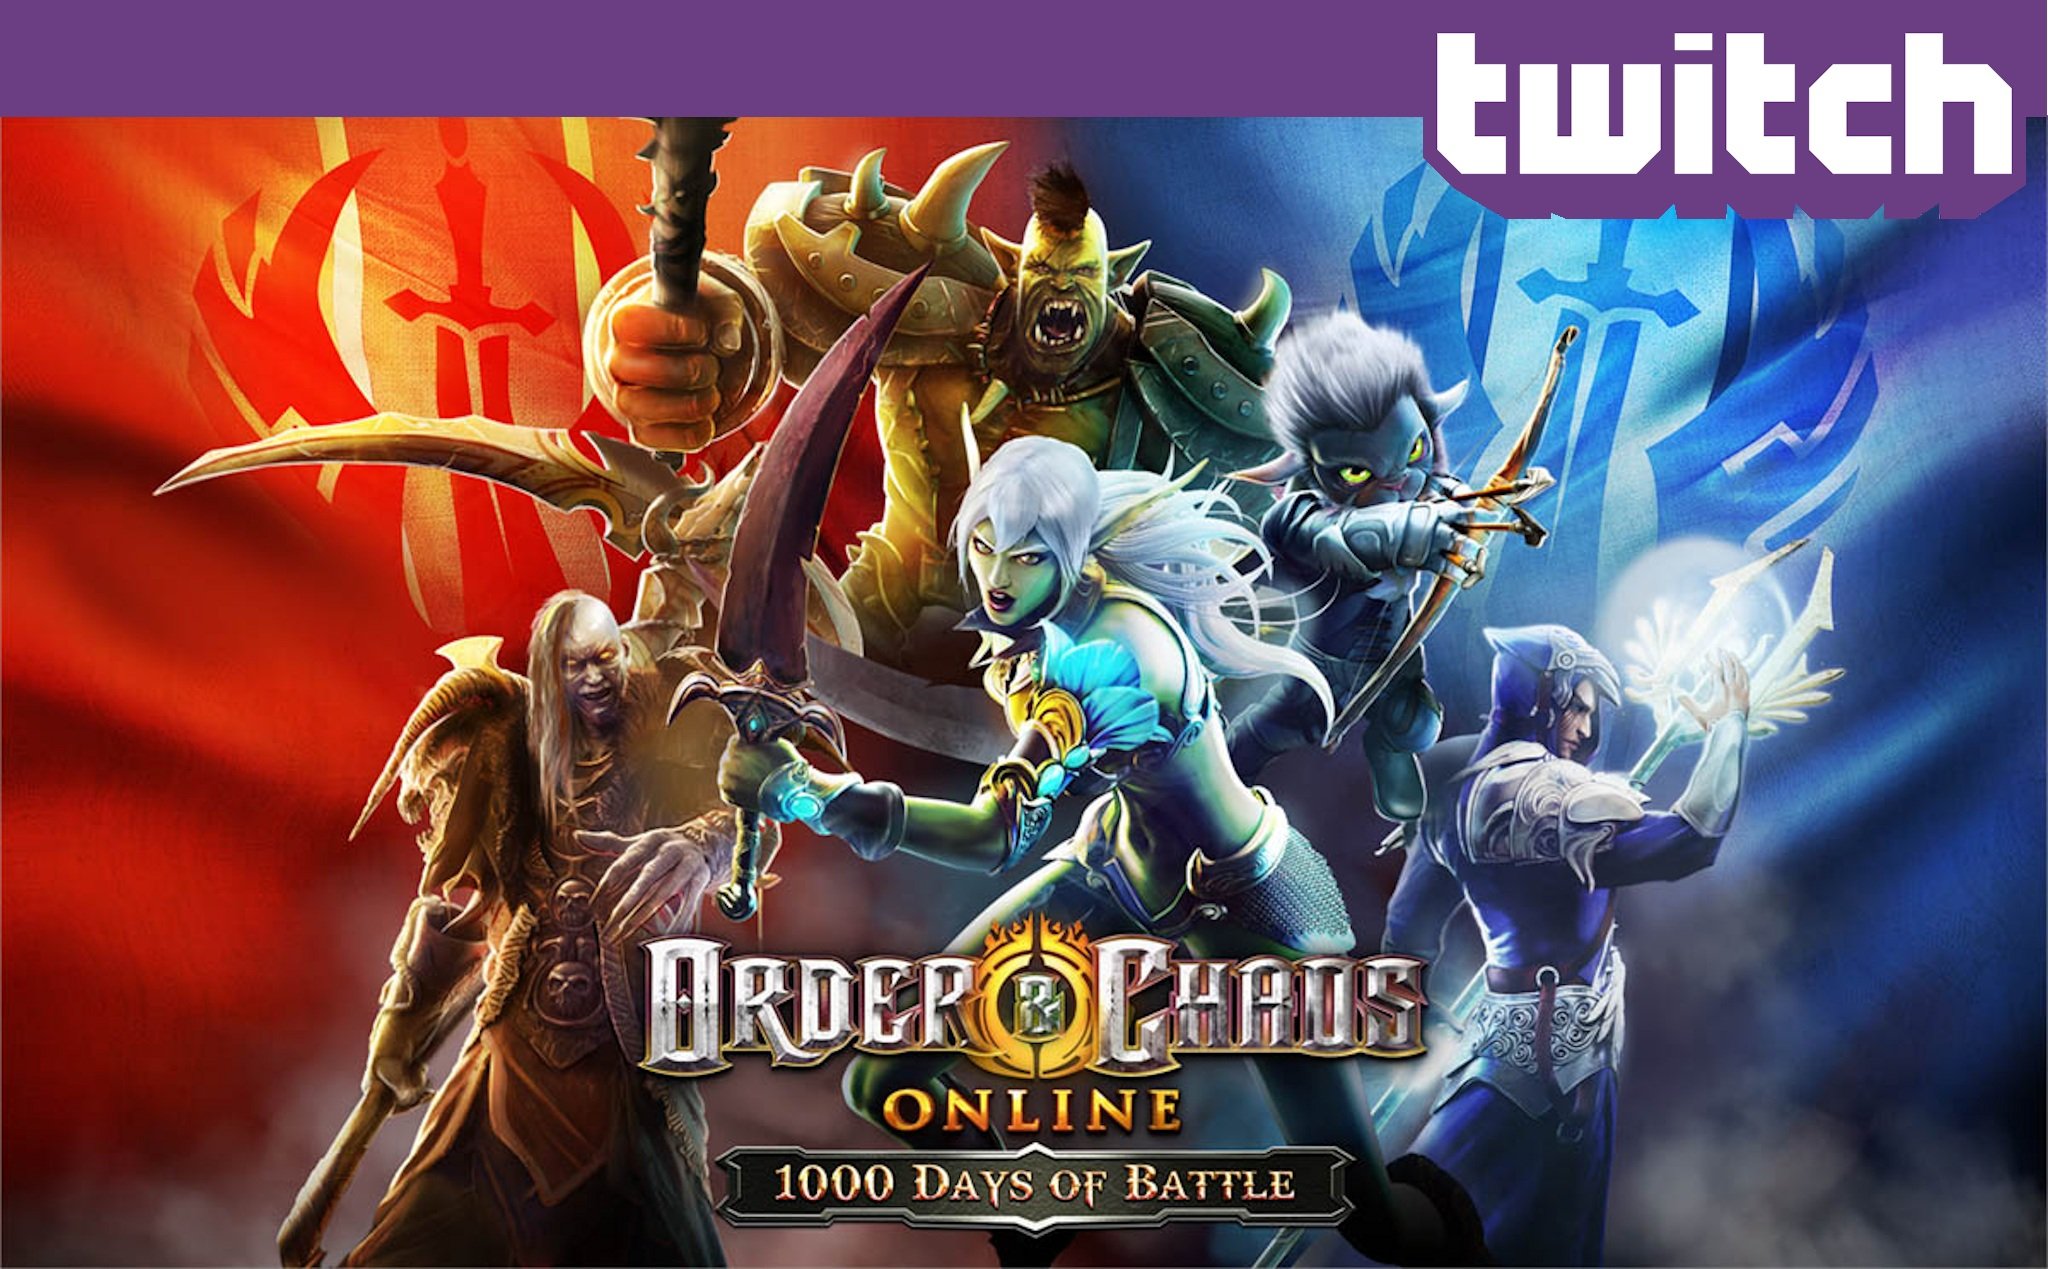 Watch and win as we play Order & Chaos Online tonight with guest co-host Gameloft Ryan!